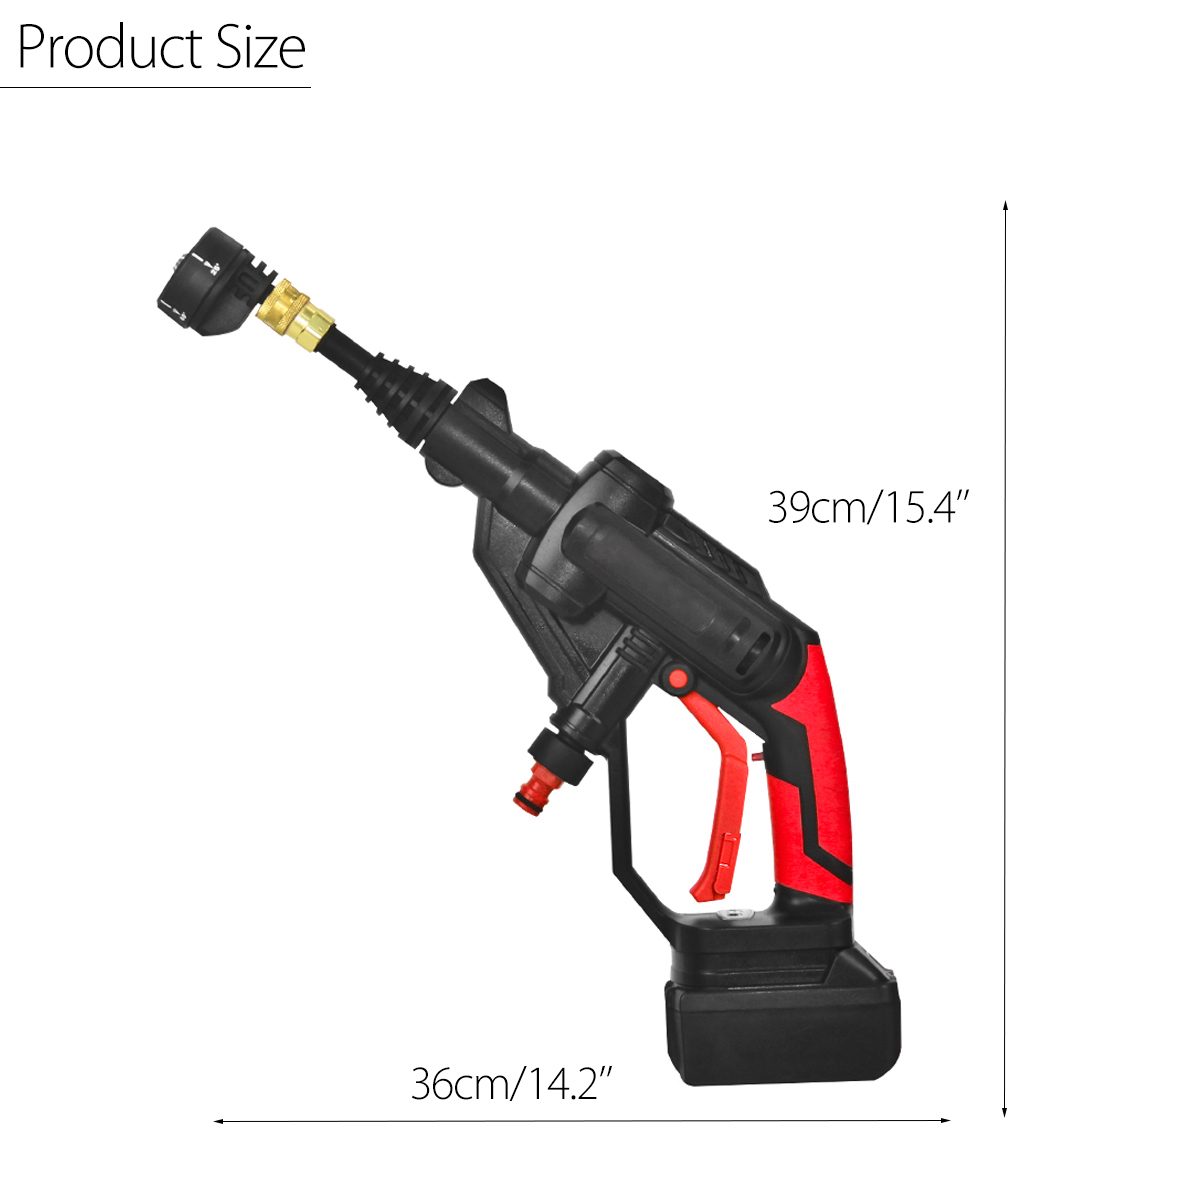 Multifunctional Cordless Pressure Cleaner Washer Gun Water Hose Nozzle Pump with Battery 22